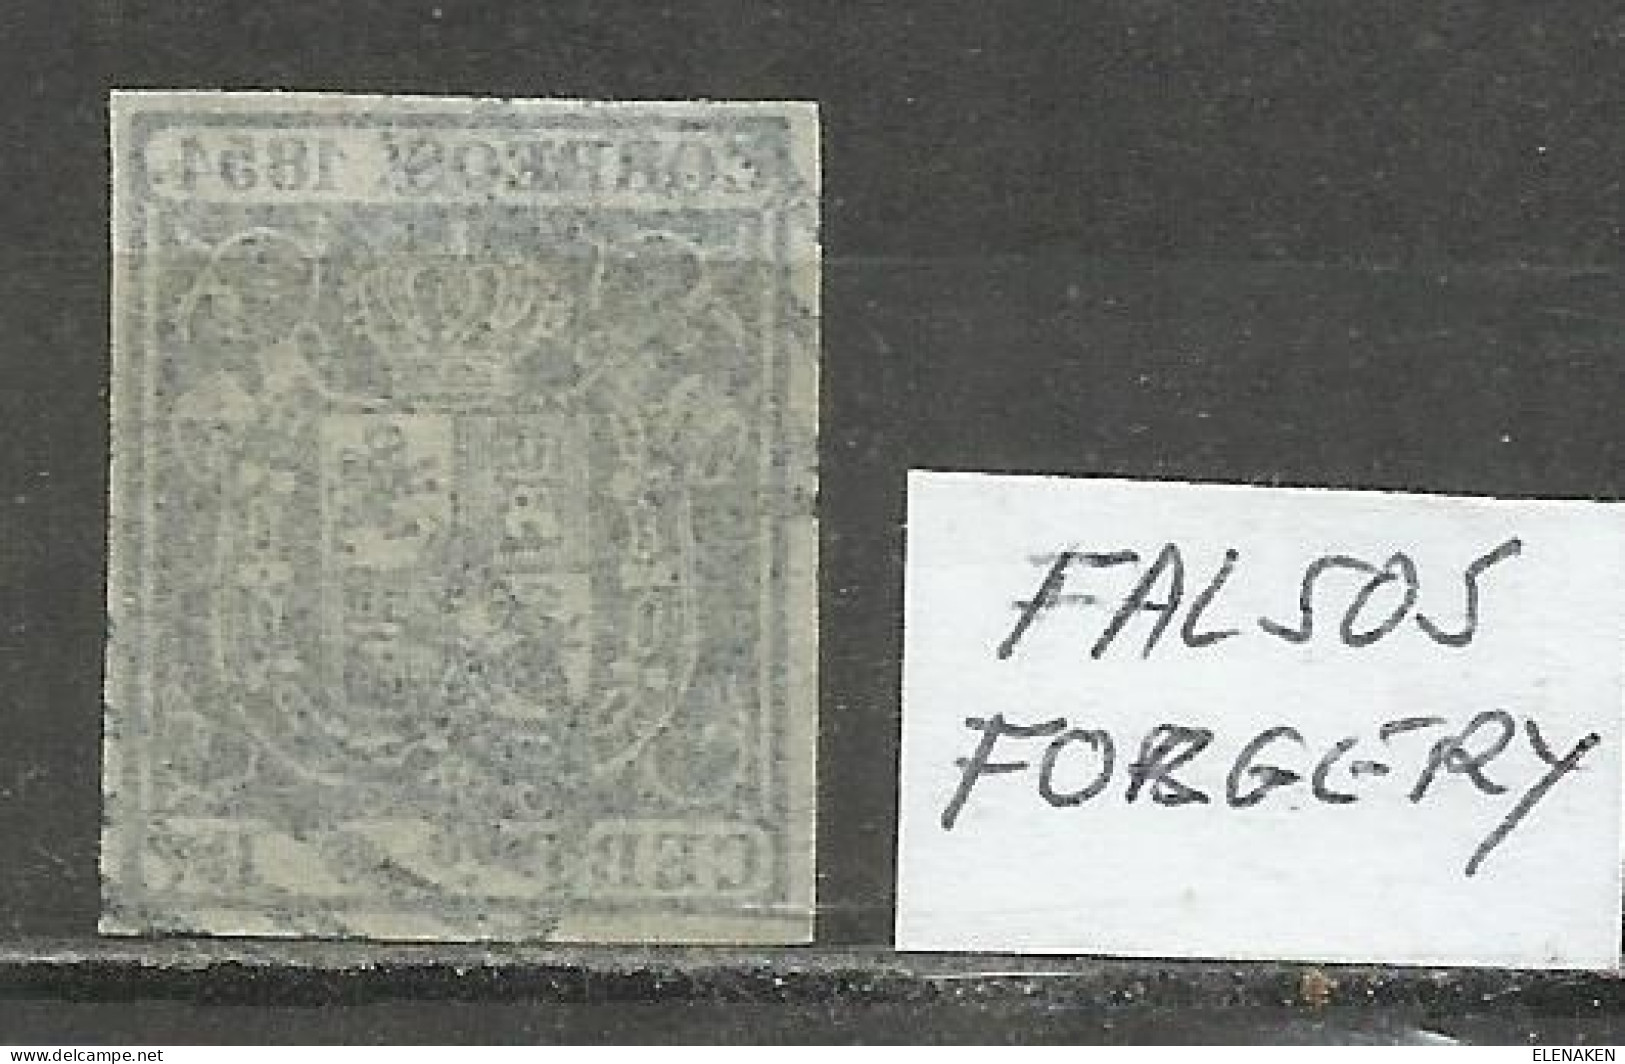 1855-SPAIN CLASSIC 1854 6 REALES Nº27 YVERT. ESPAÑA CLASICO USADO 3900,00€ PERFECTO,MAGNIFICO, FORGERY,FALSO FILATELICO. - Proofs & Reprints